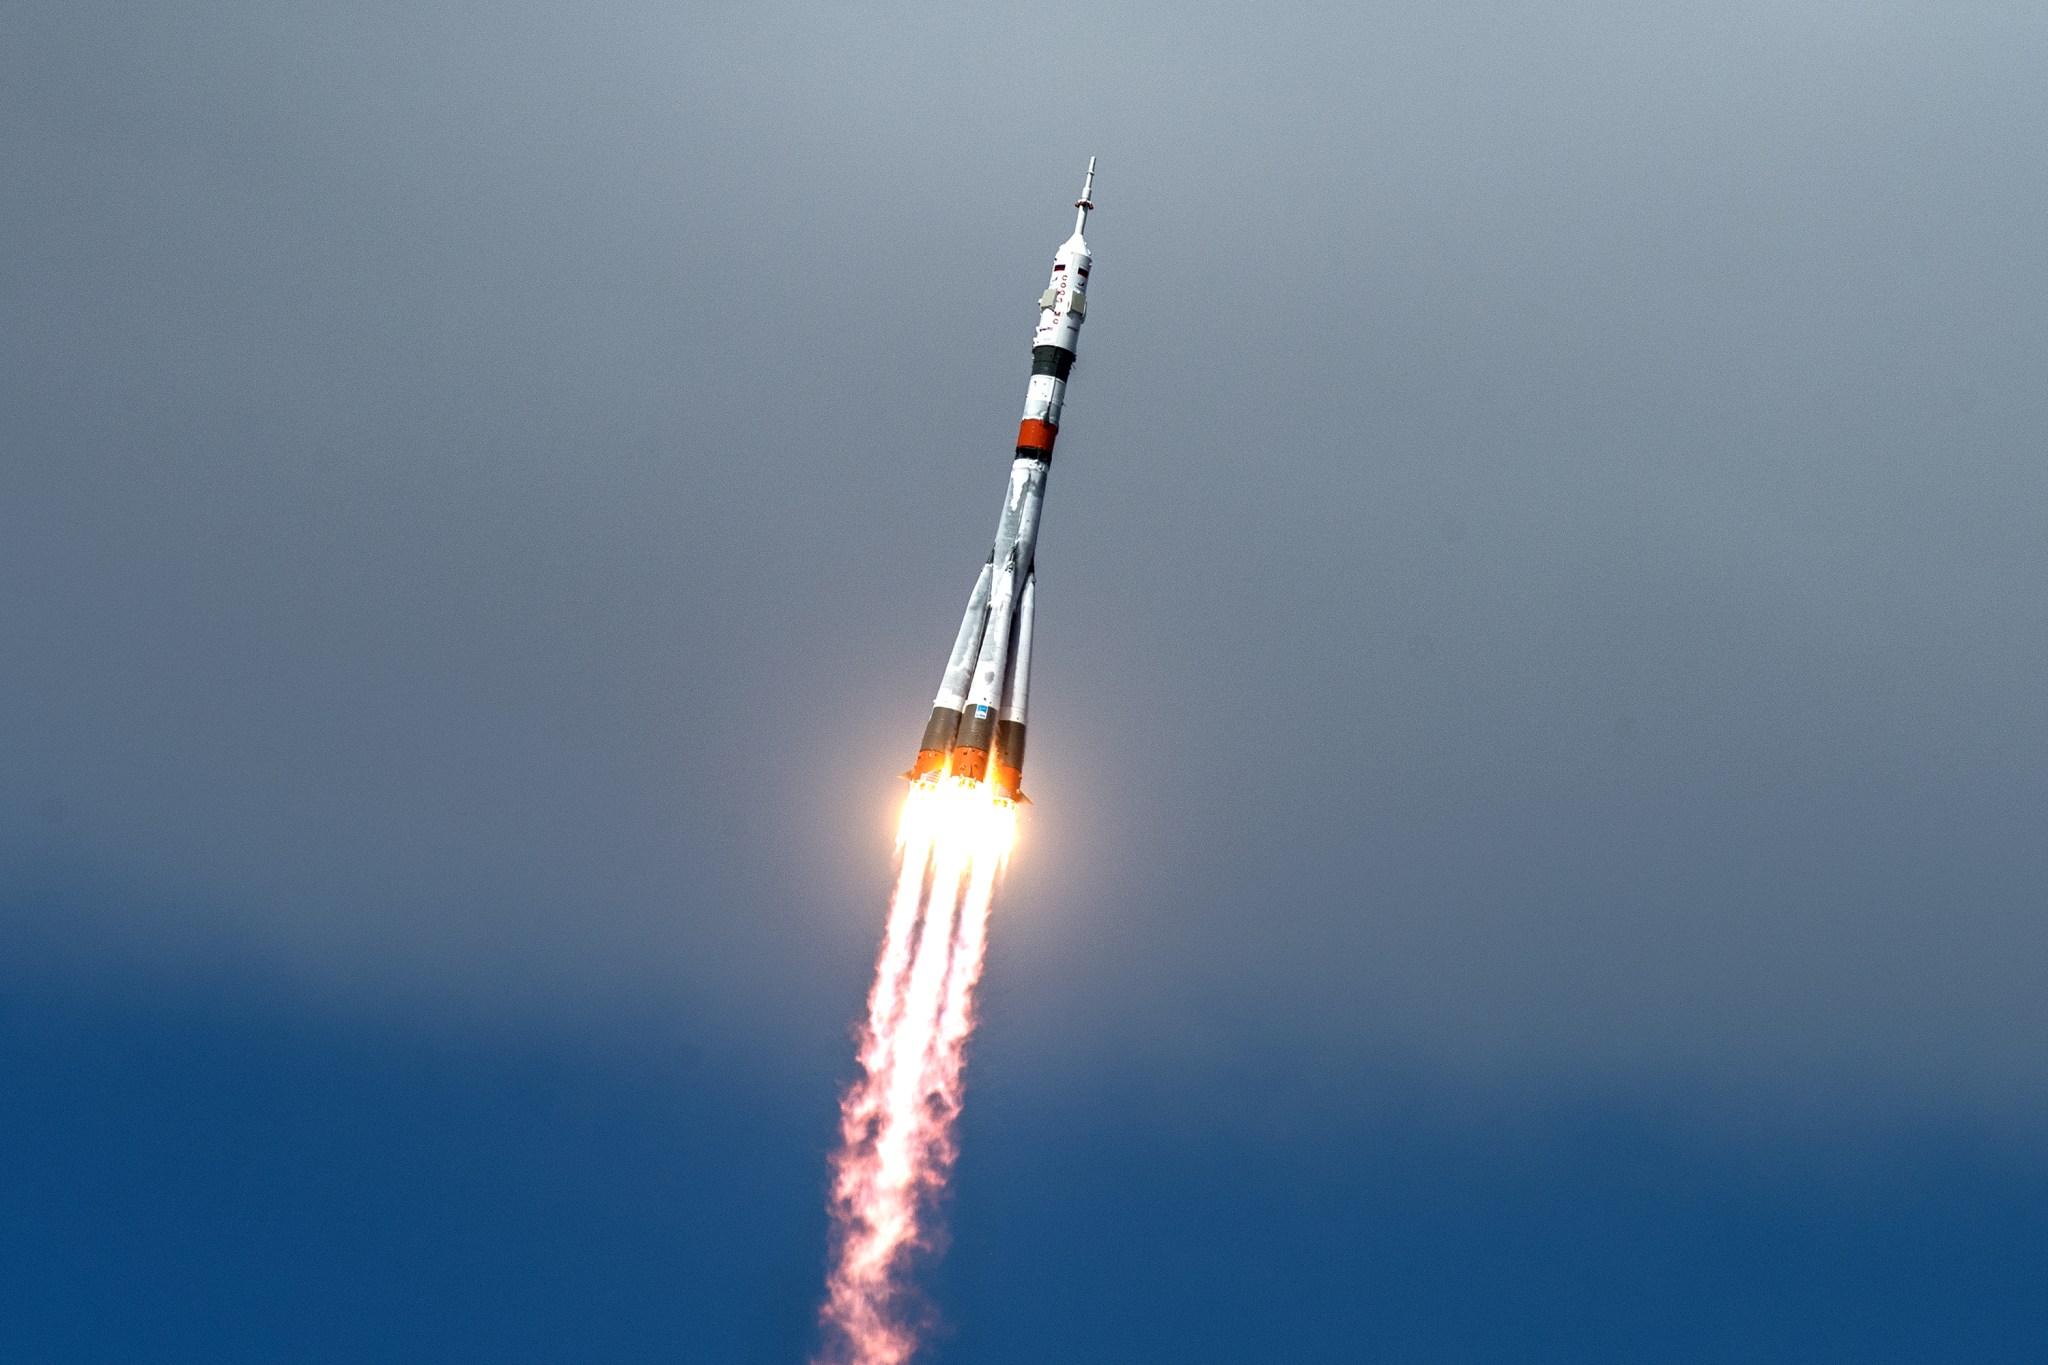 The Soyuz MS-16 lifts off from Site 31 at the Baikonur Cosmodrome in Kazakhstan Thursday, April 9, 2020